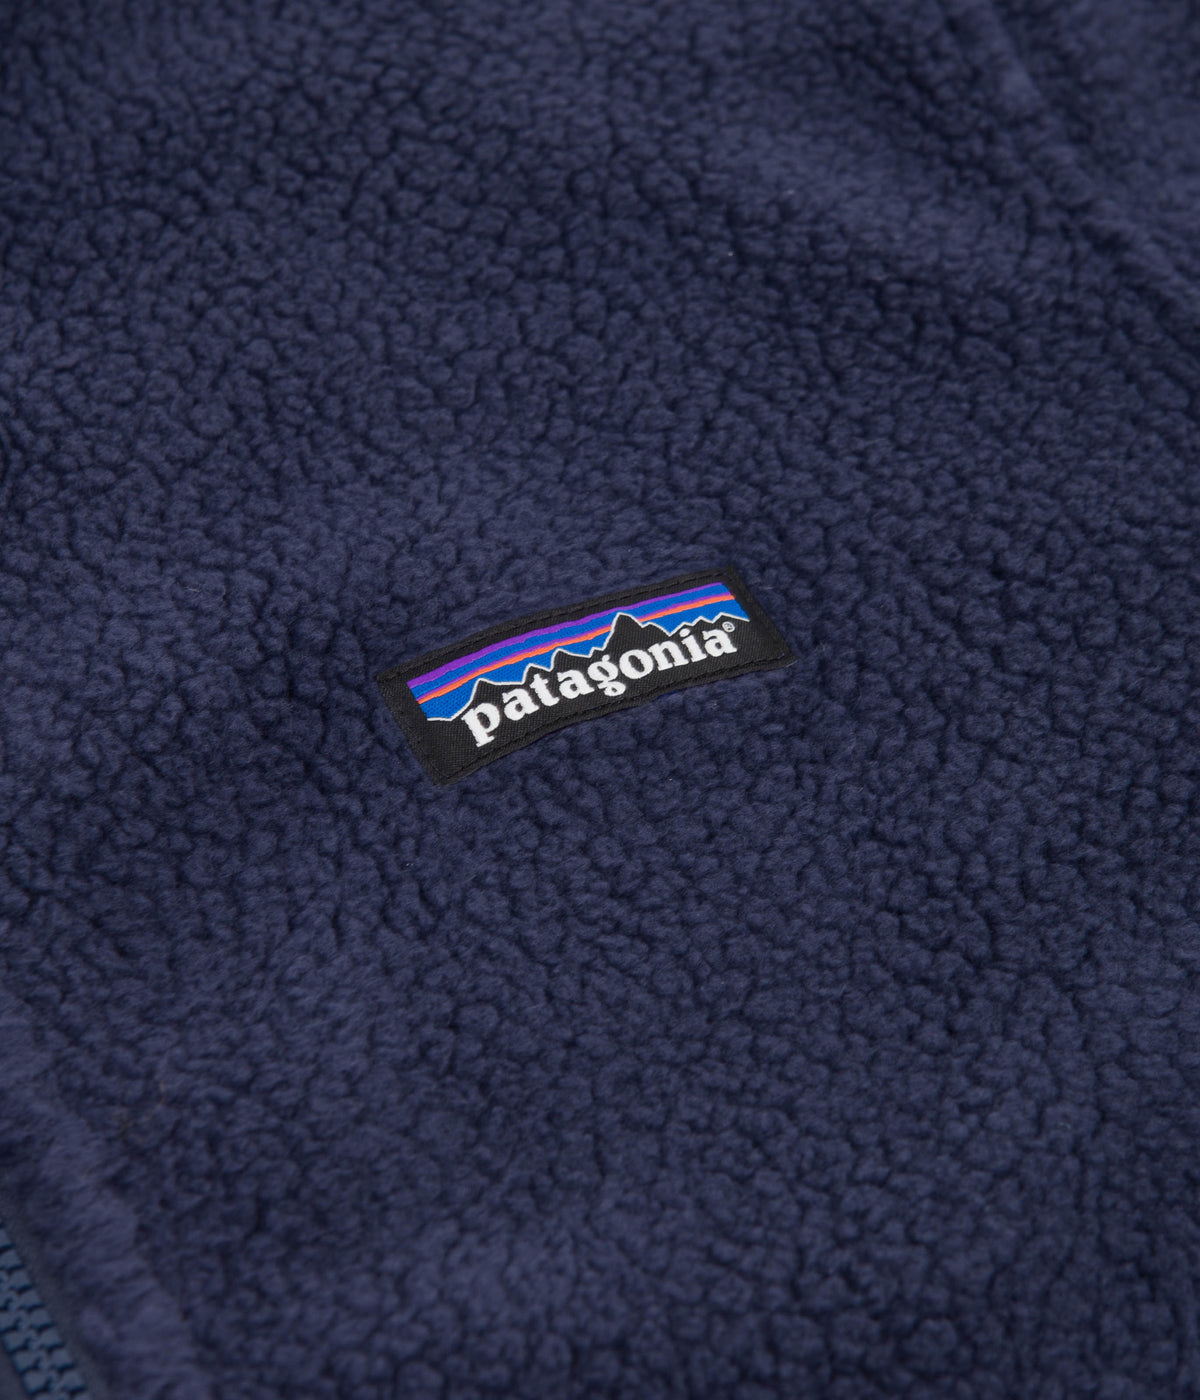 Patagonia Shearling Jacket - New Navy | Always in Colour